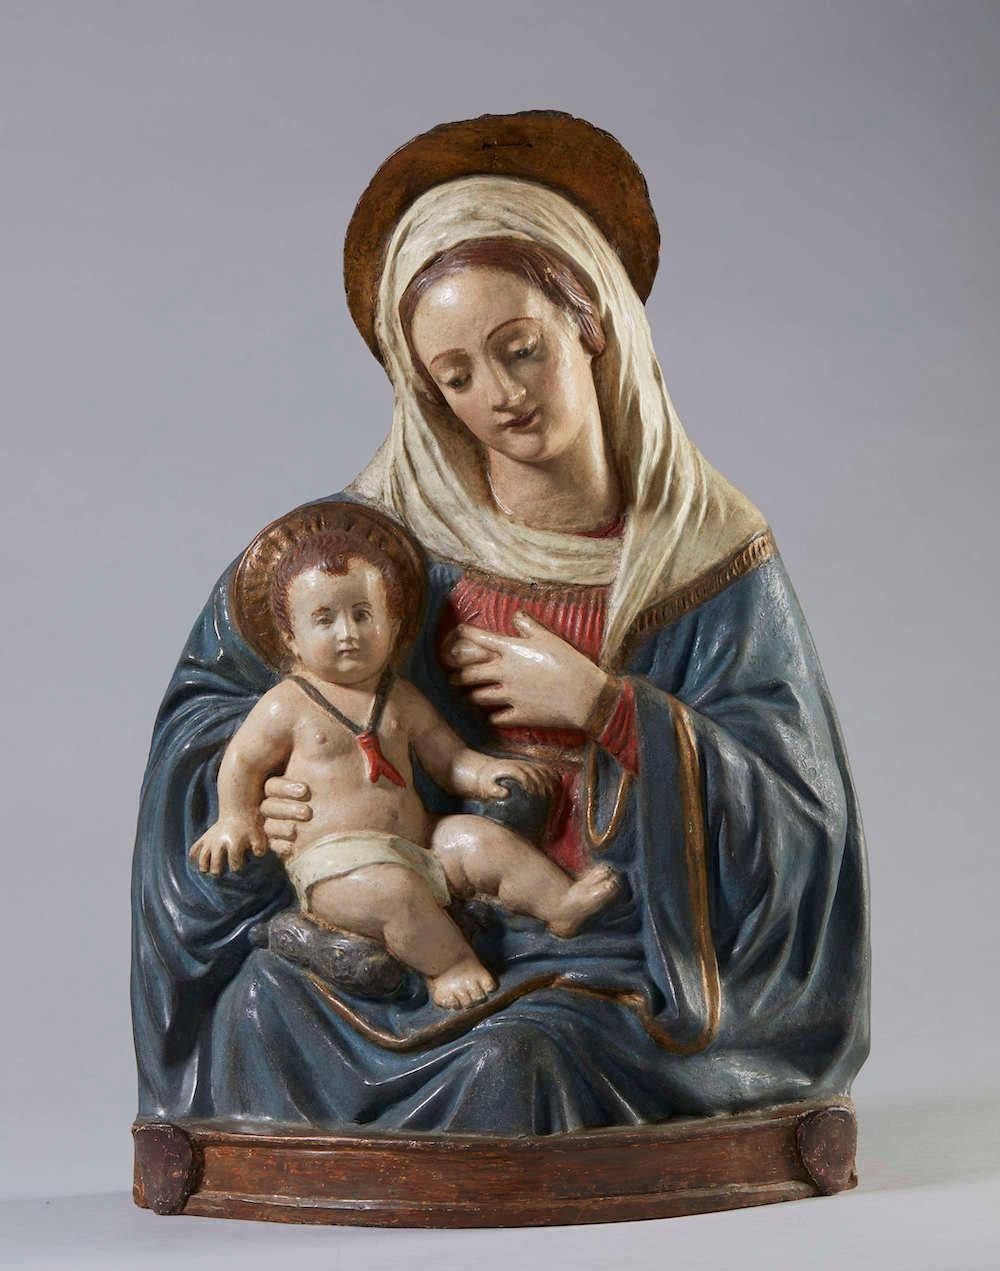 Our Lady of Milk

polychrome stucco relief

scope of Benedetto da Maiano

Florence, 16th century

cm 66 x 18 x 43 


From the 15th century onward, the pleasure of modeling terracotta and stucco for the production of sacred works of art often